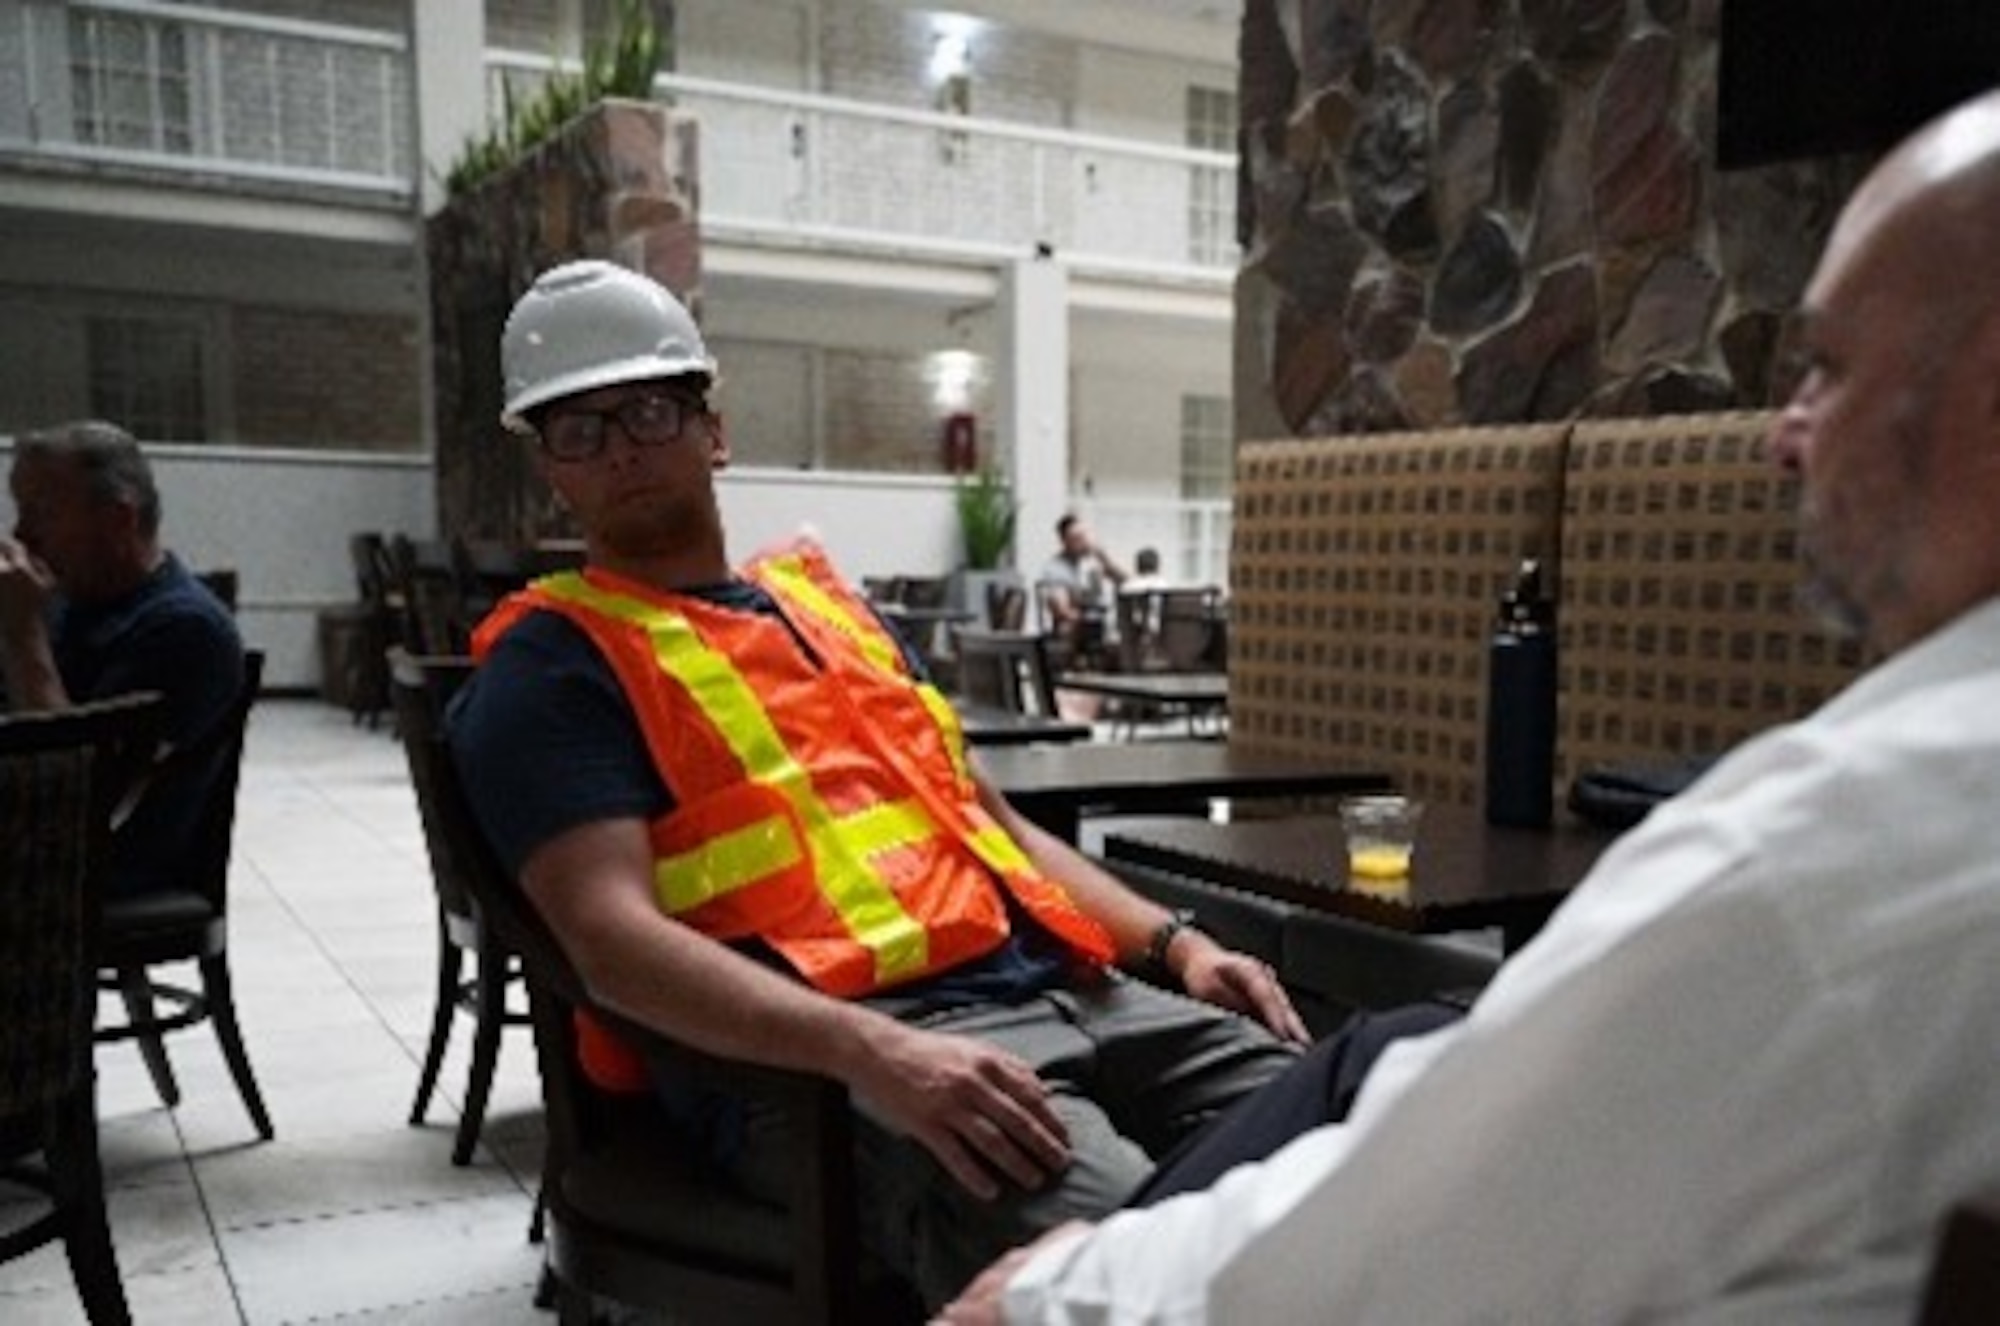 People sitting at a table one wearing construction gear.